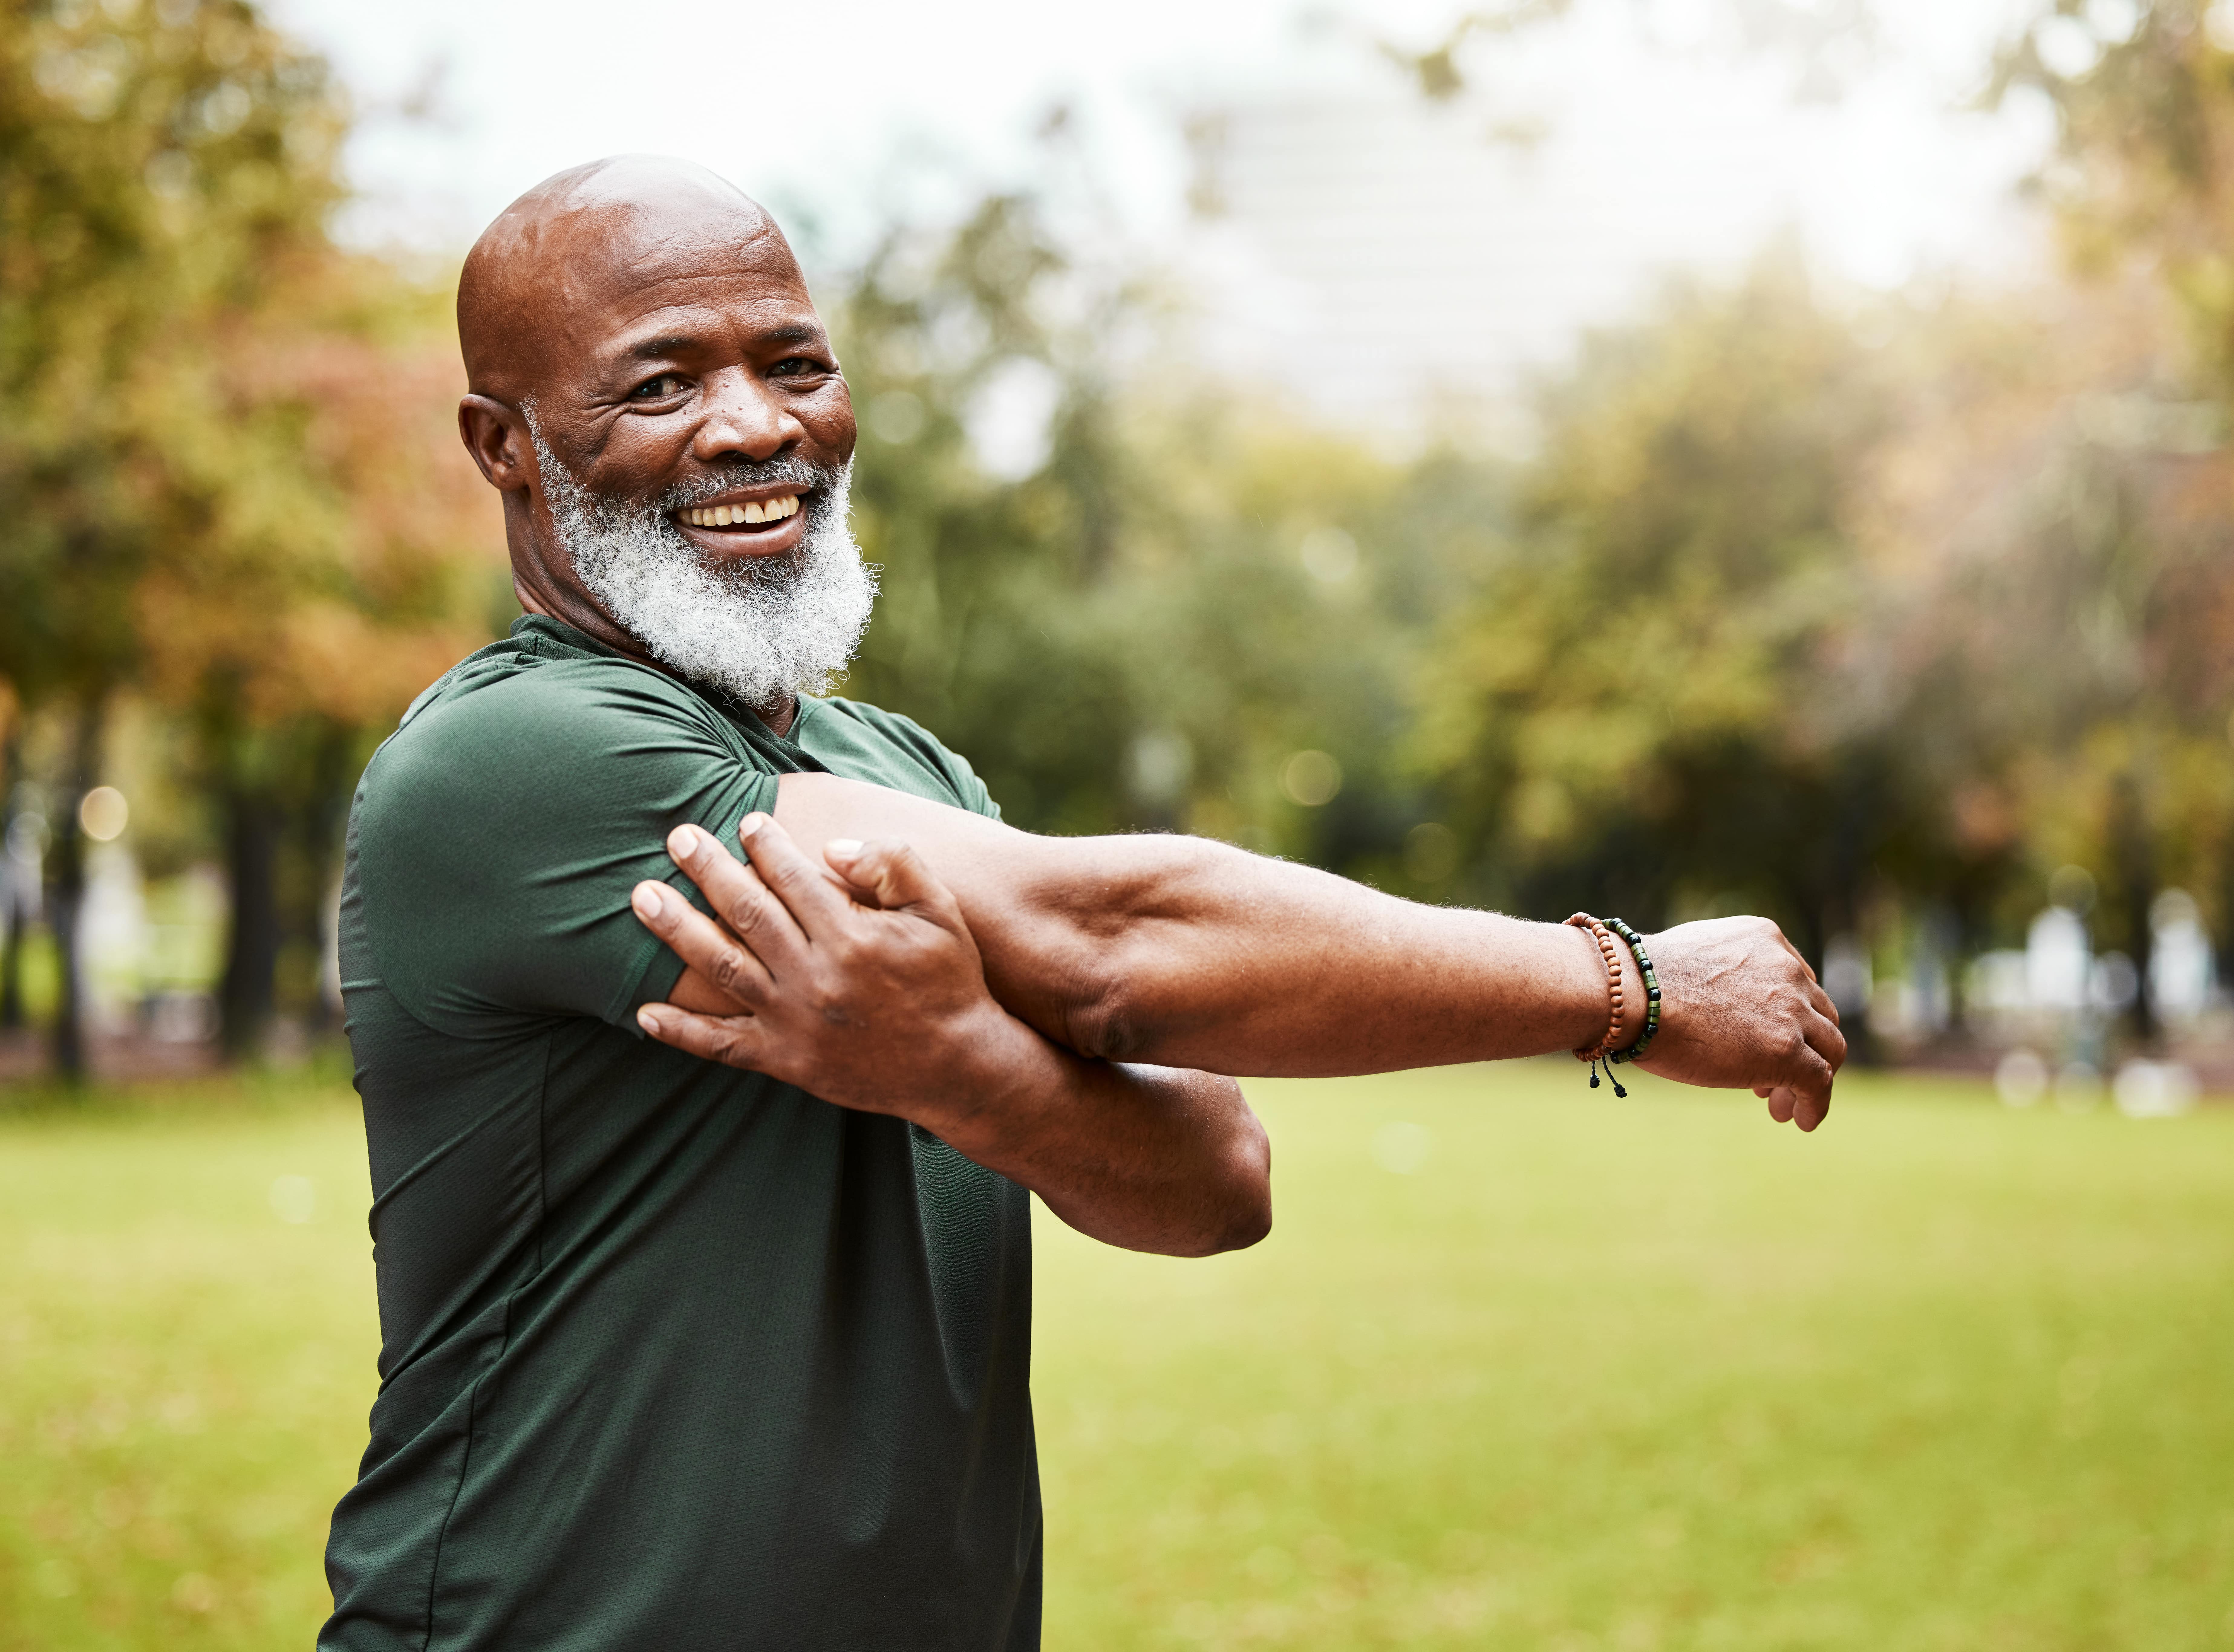 Man smiling in a park stretching his arms in preparation for exercise.